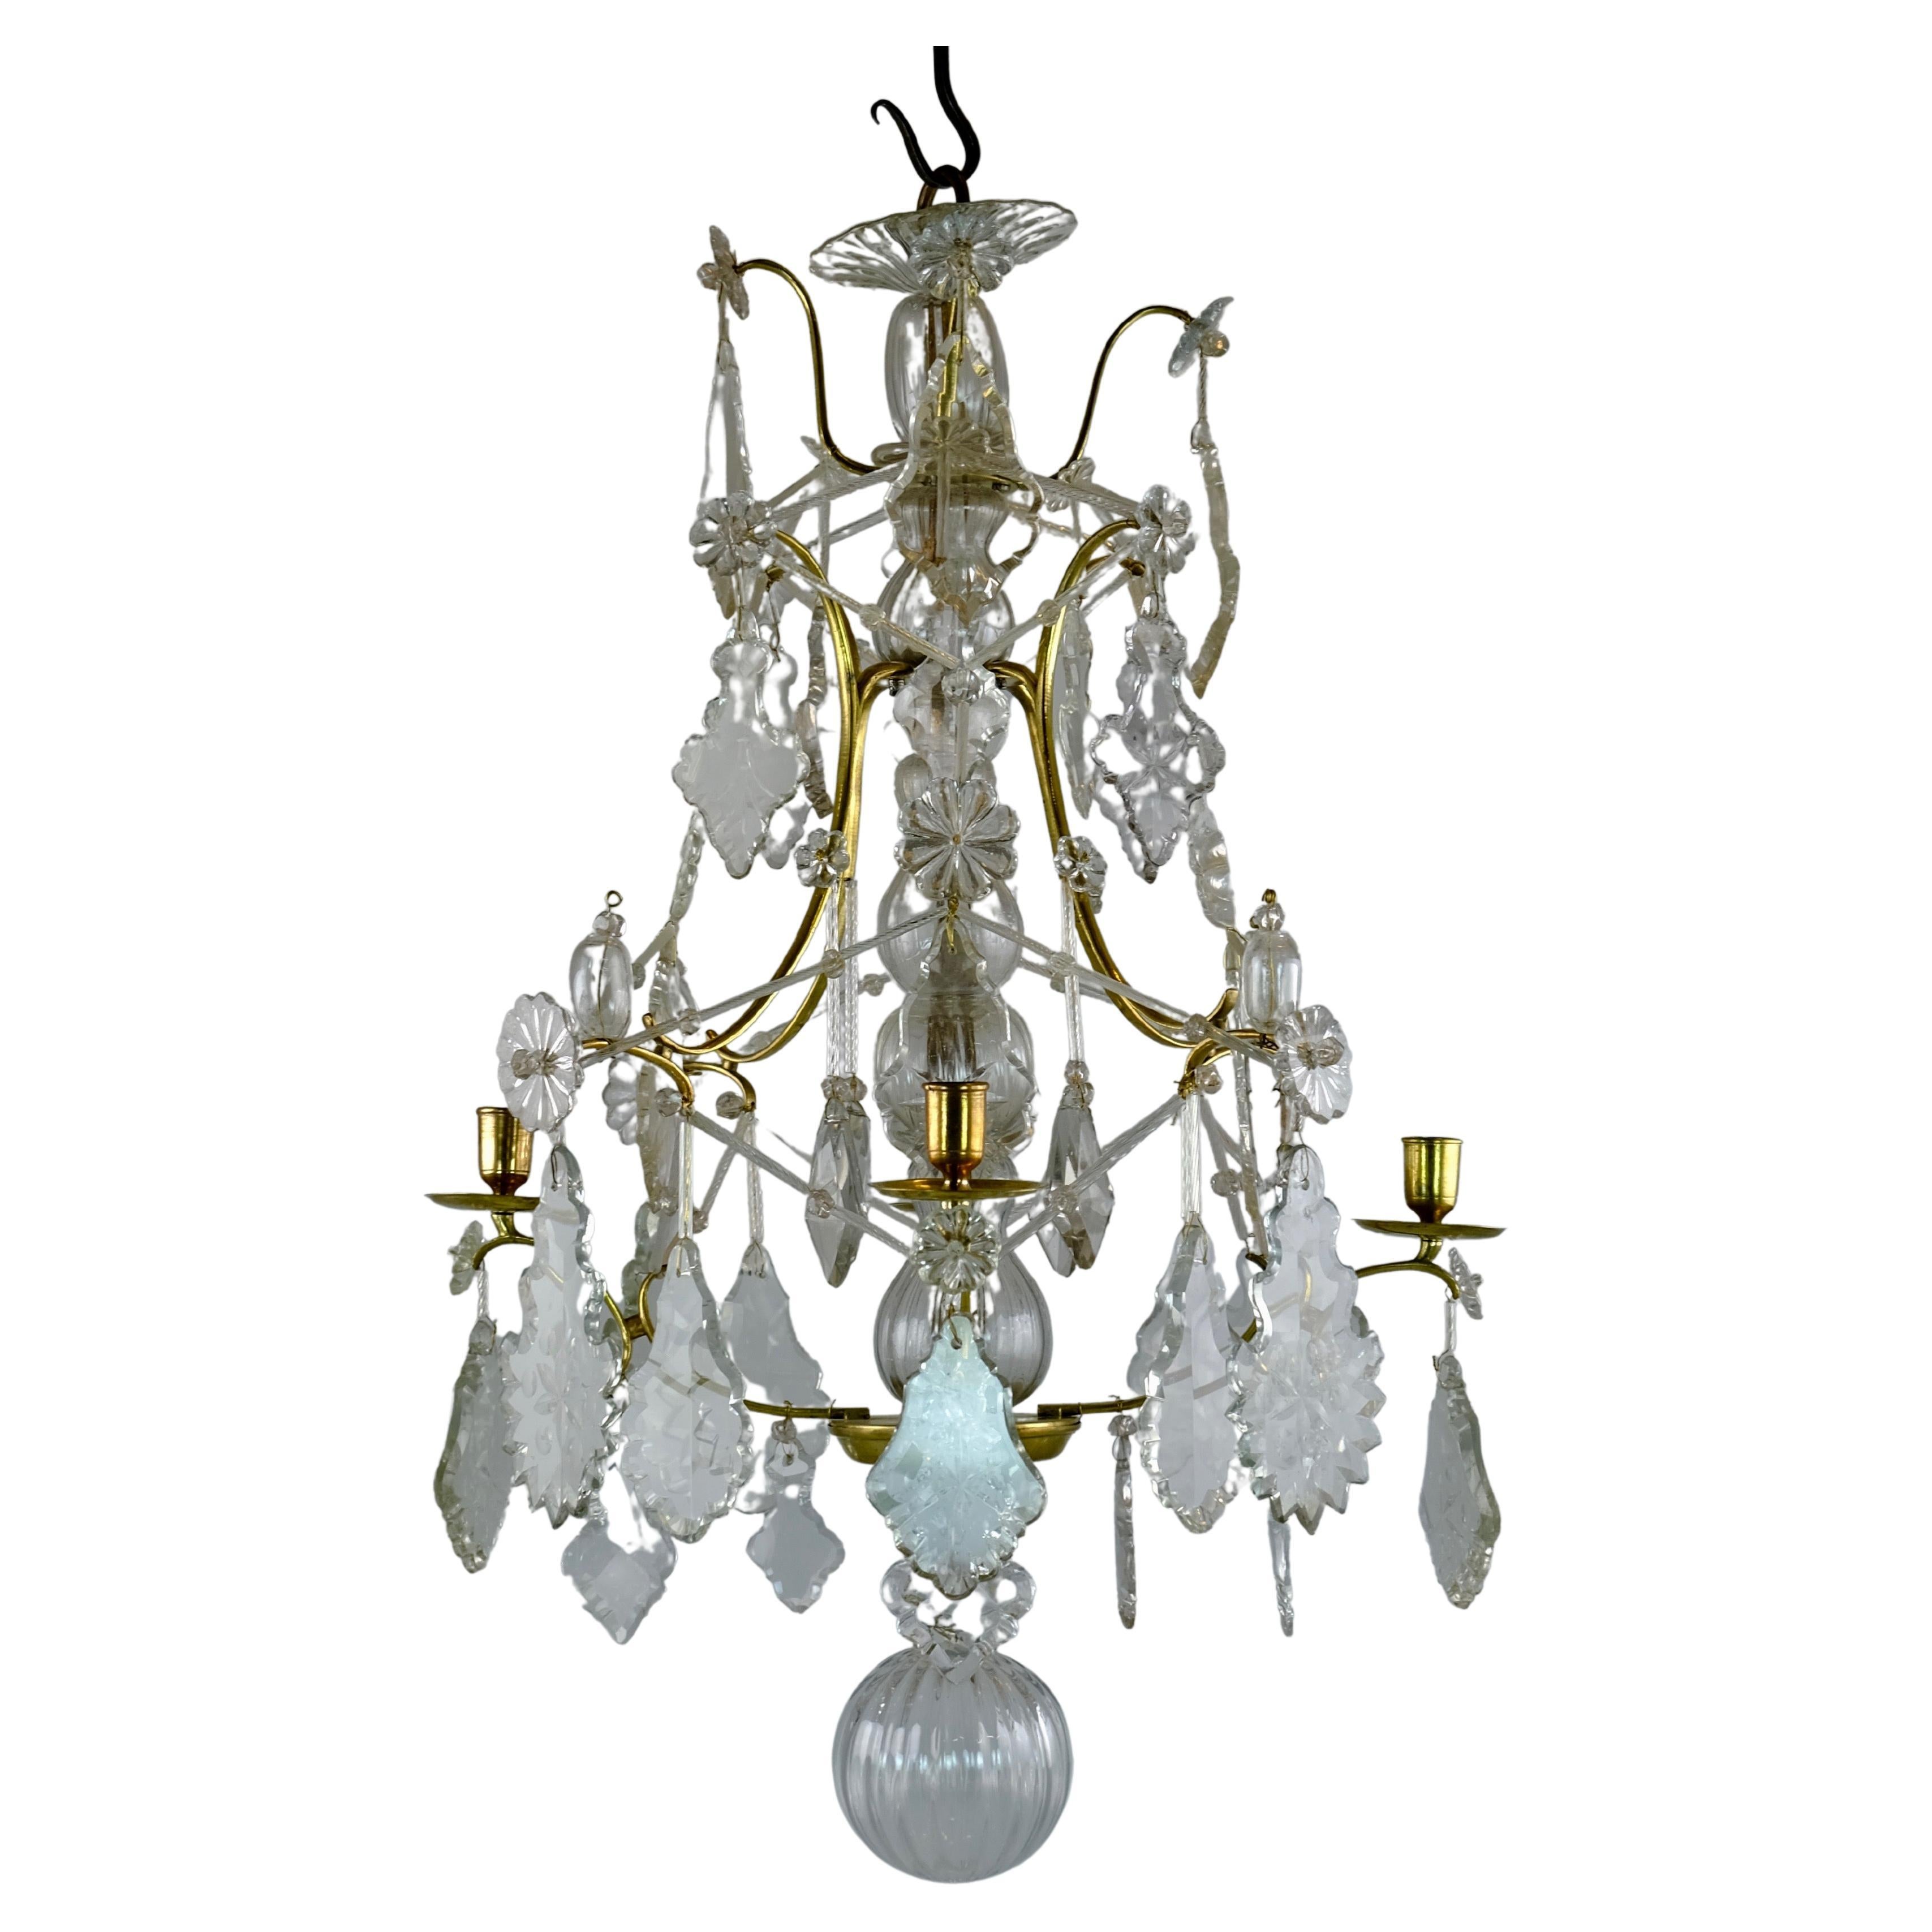 Swedish Rococo Brass and Cut-Glass Chandelier, 18th c. For Sale at 1stDibs